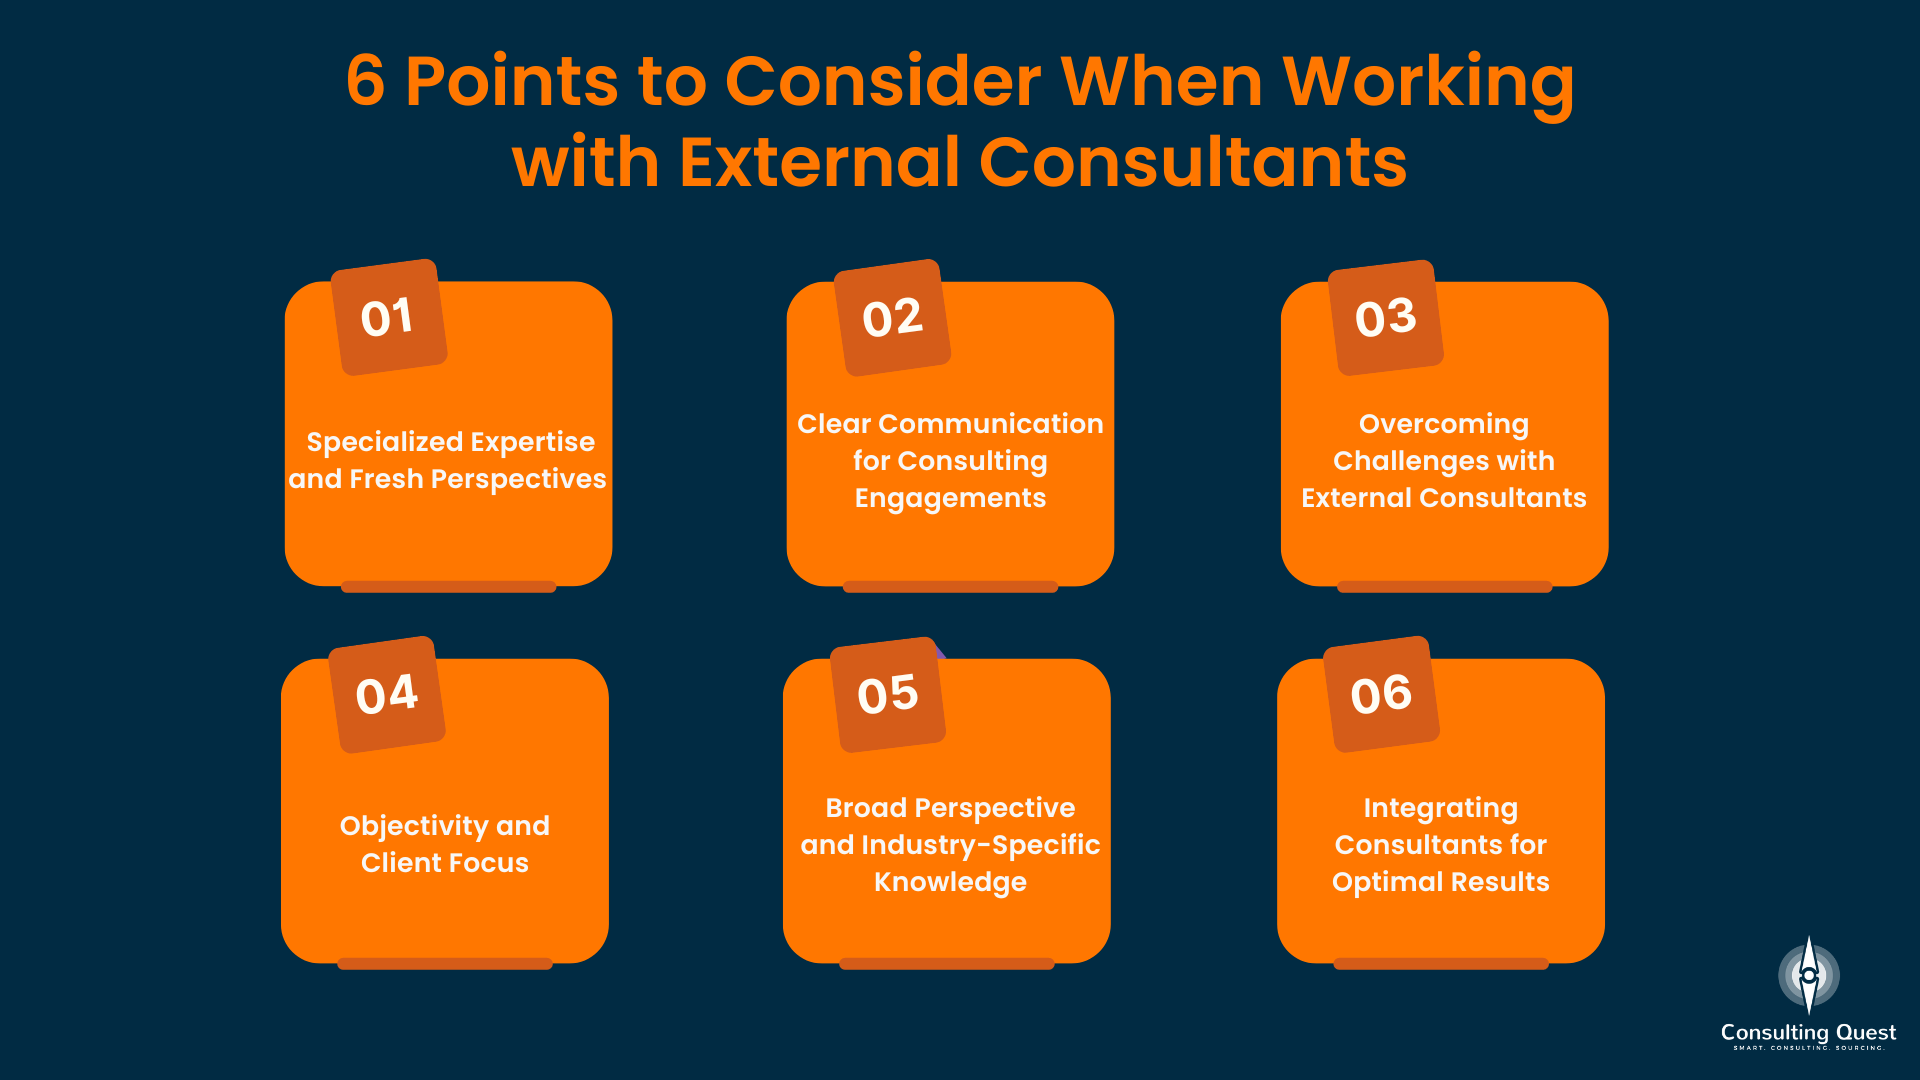 6 Points to Consider when working with External Consultants